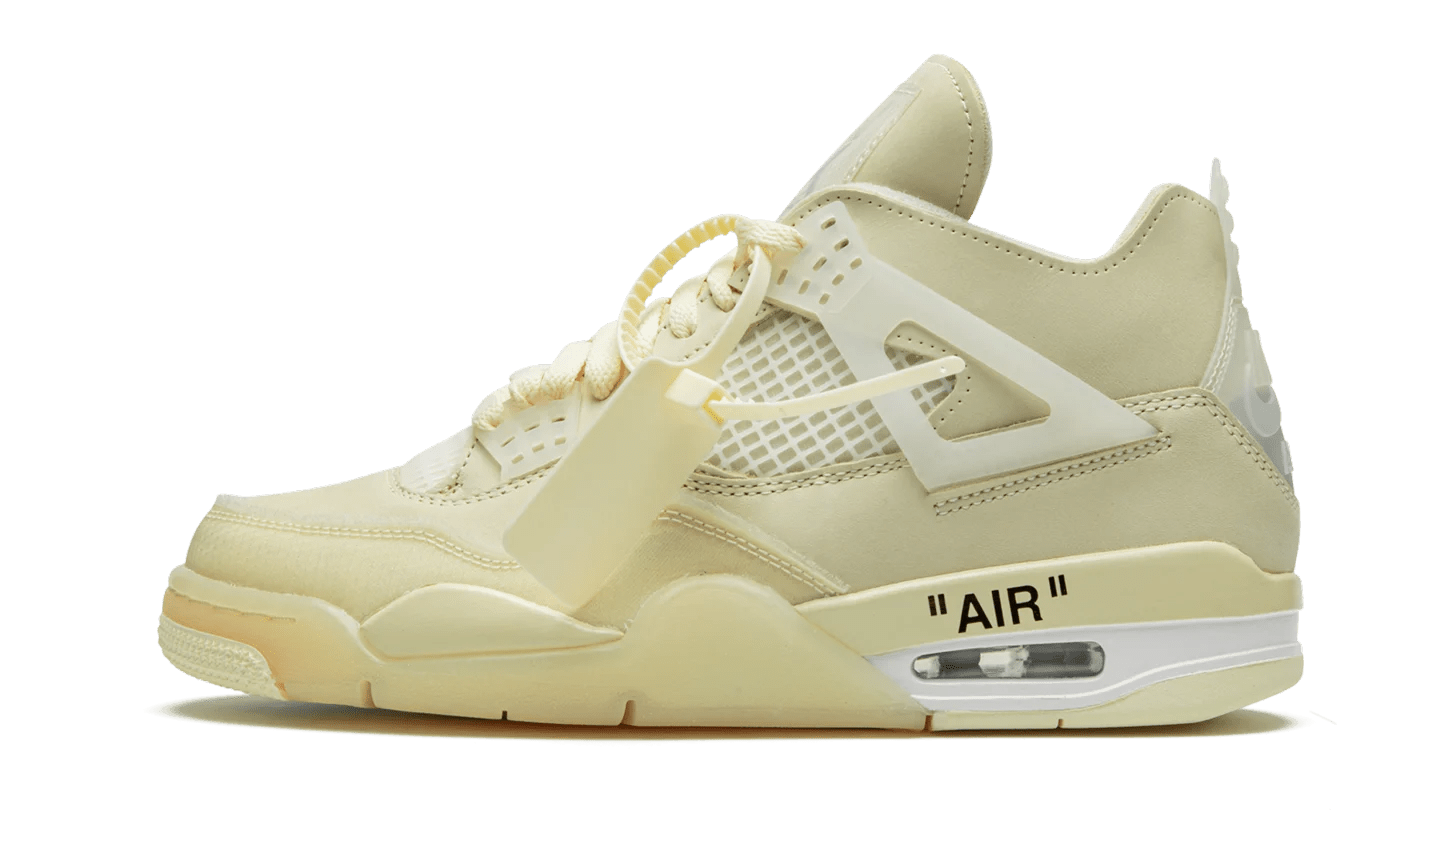 are the off white jordan 4 womens